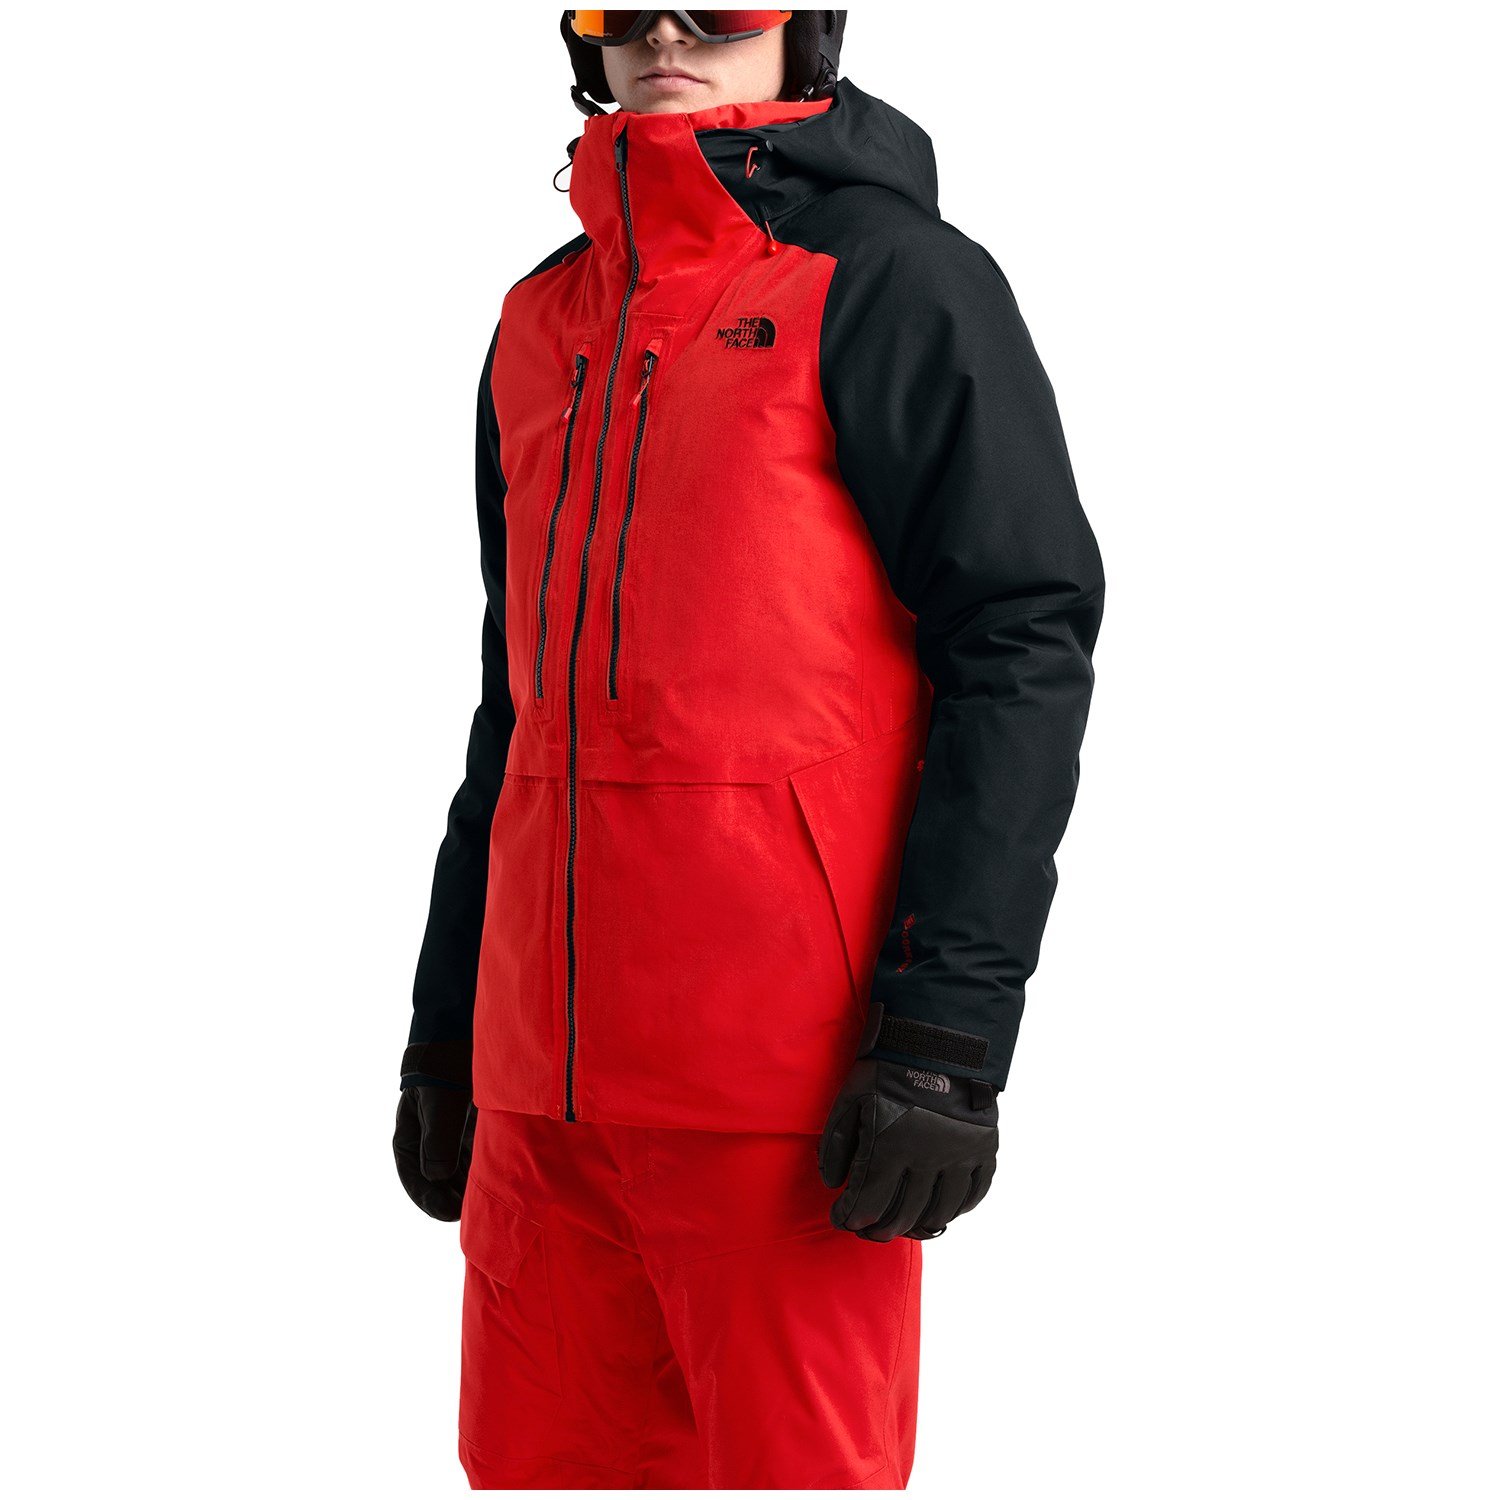 The North Face Powder Guide Jacket | evo